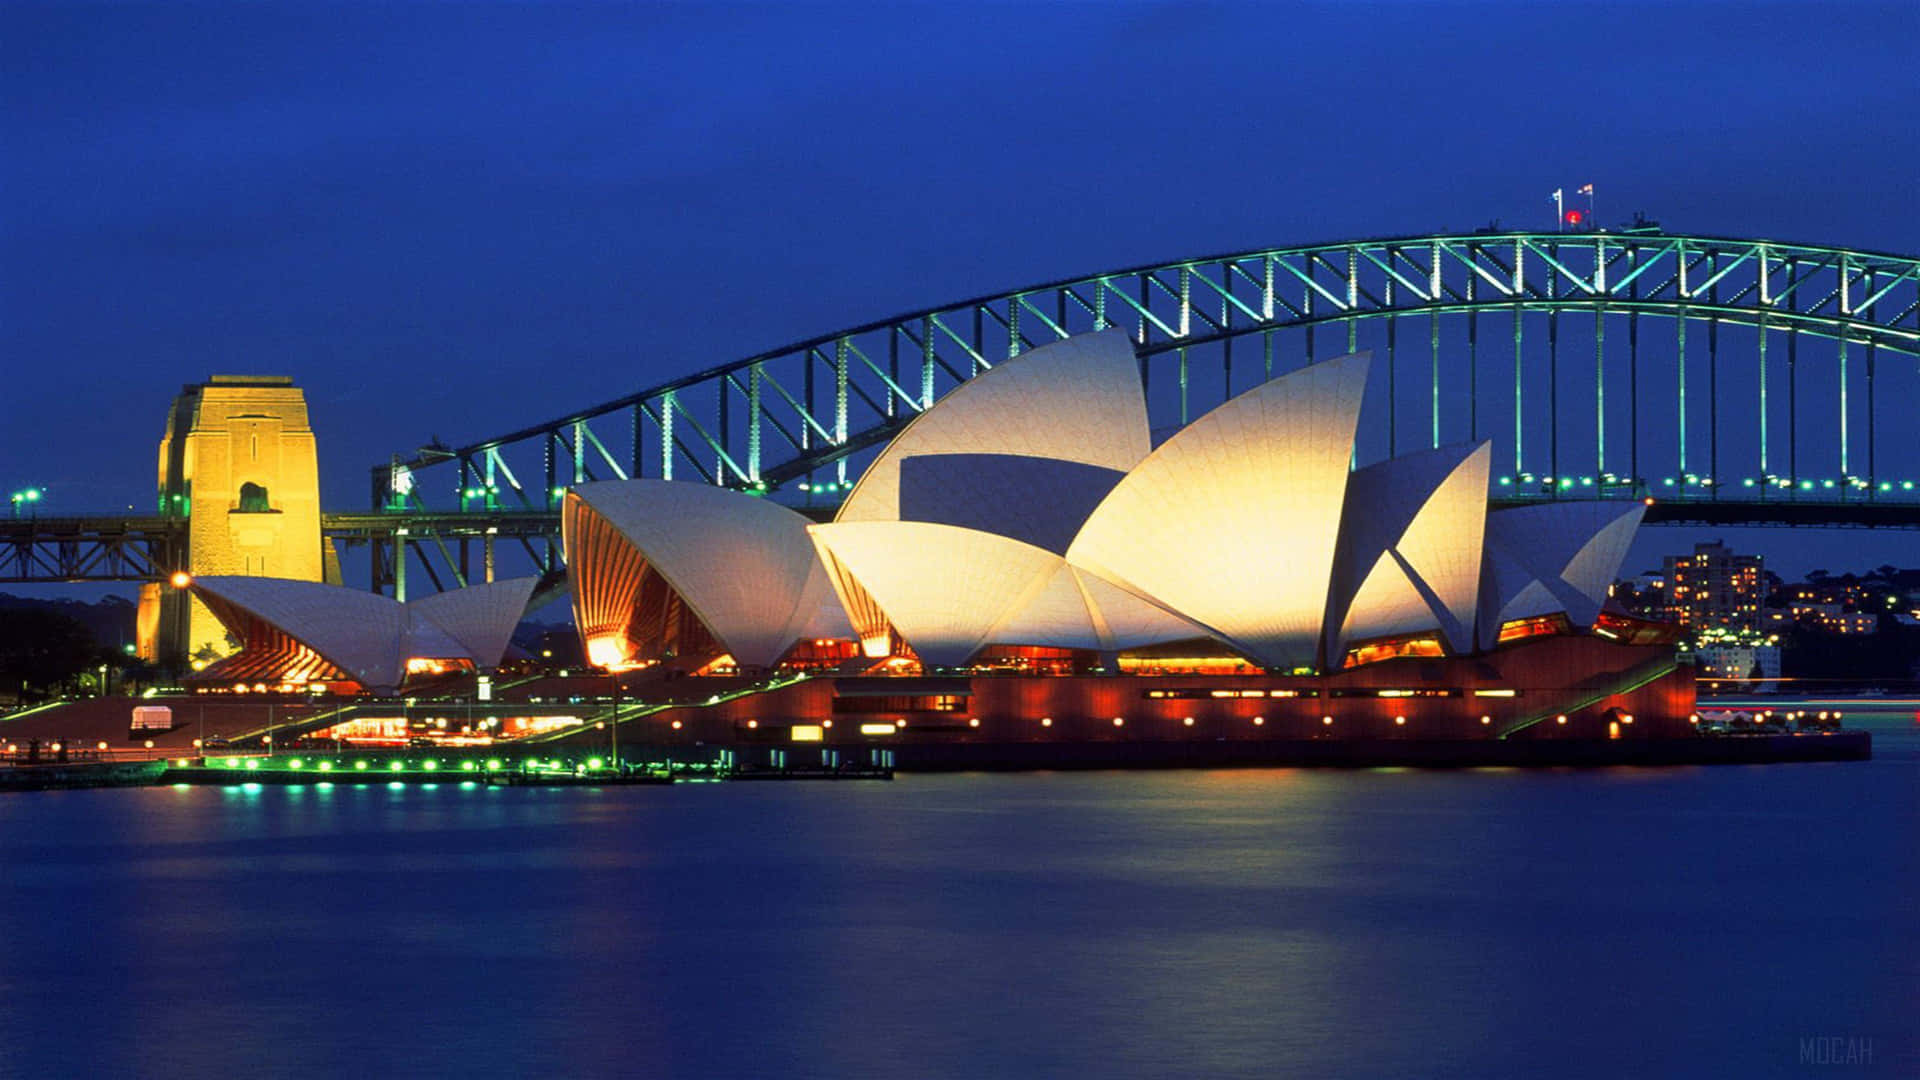 Enjoy the sights of Australia with a visit to its rolling hills, coastal plains, and rivers.